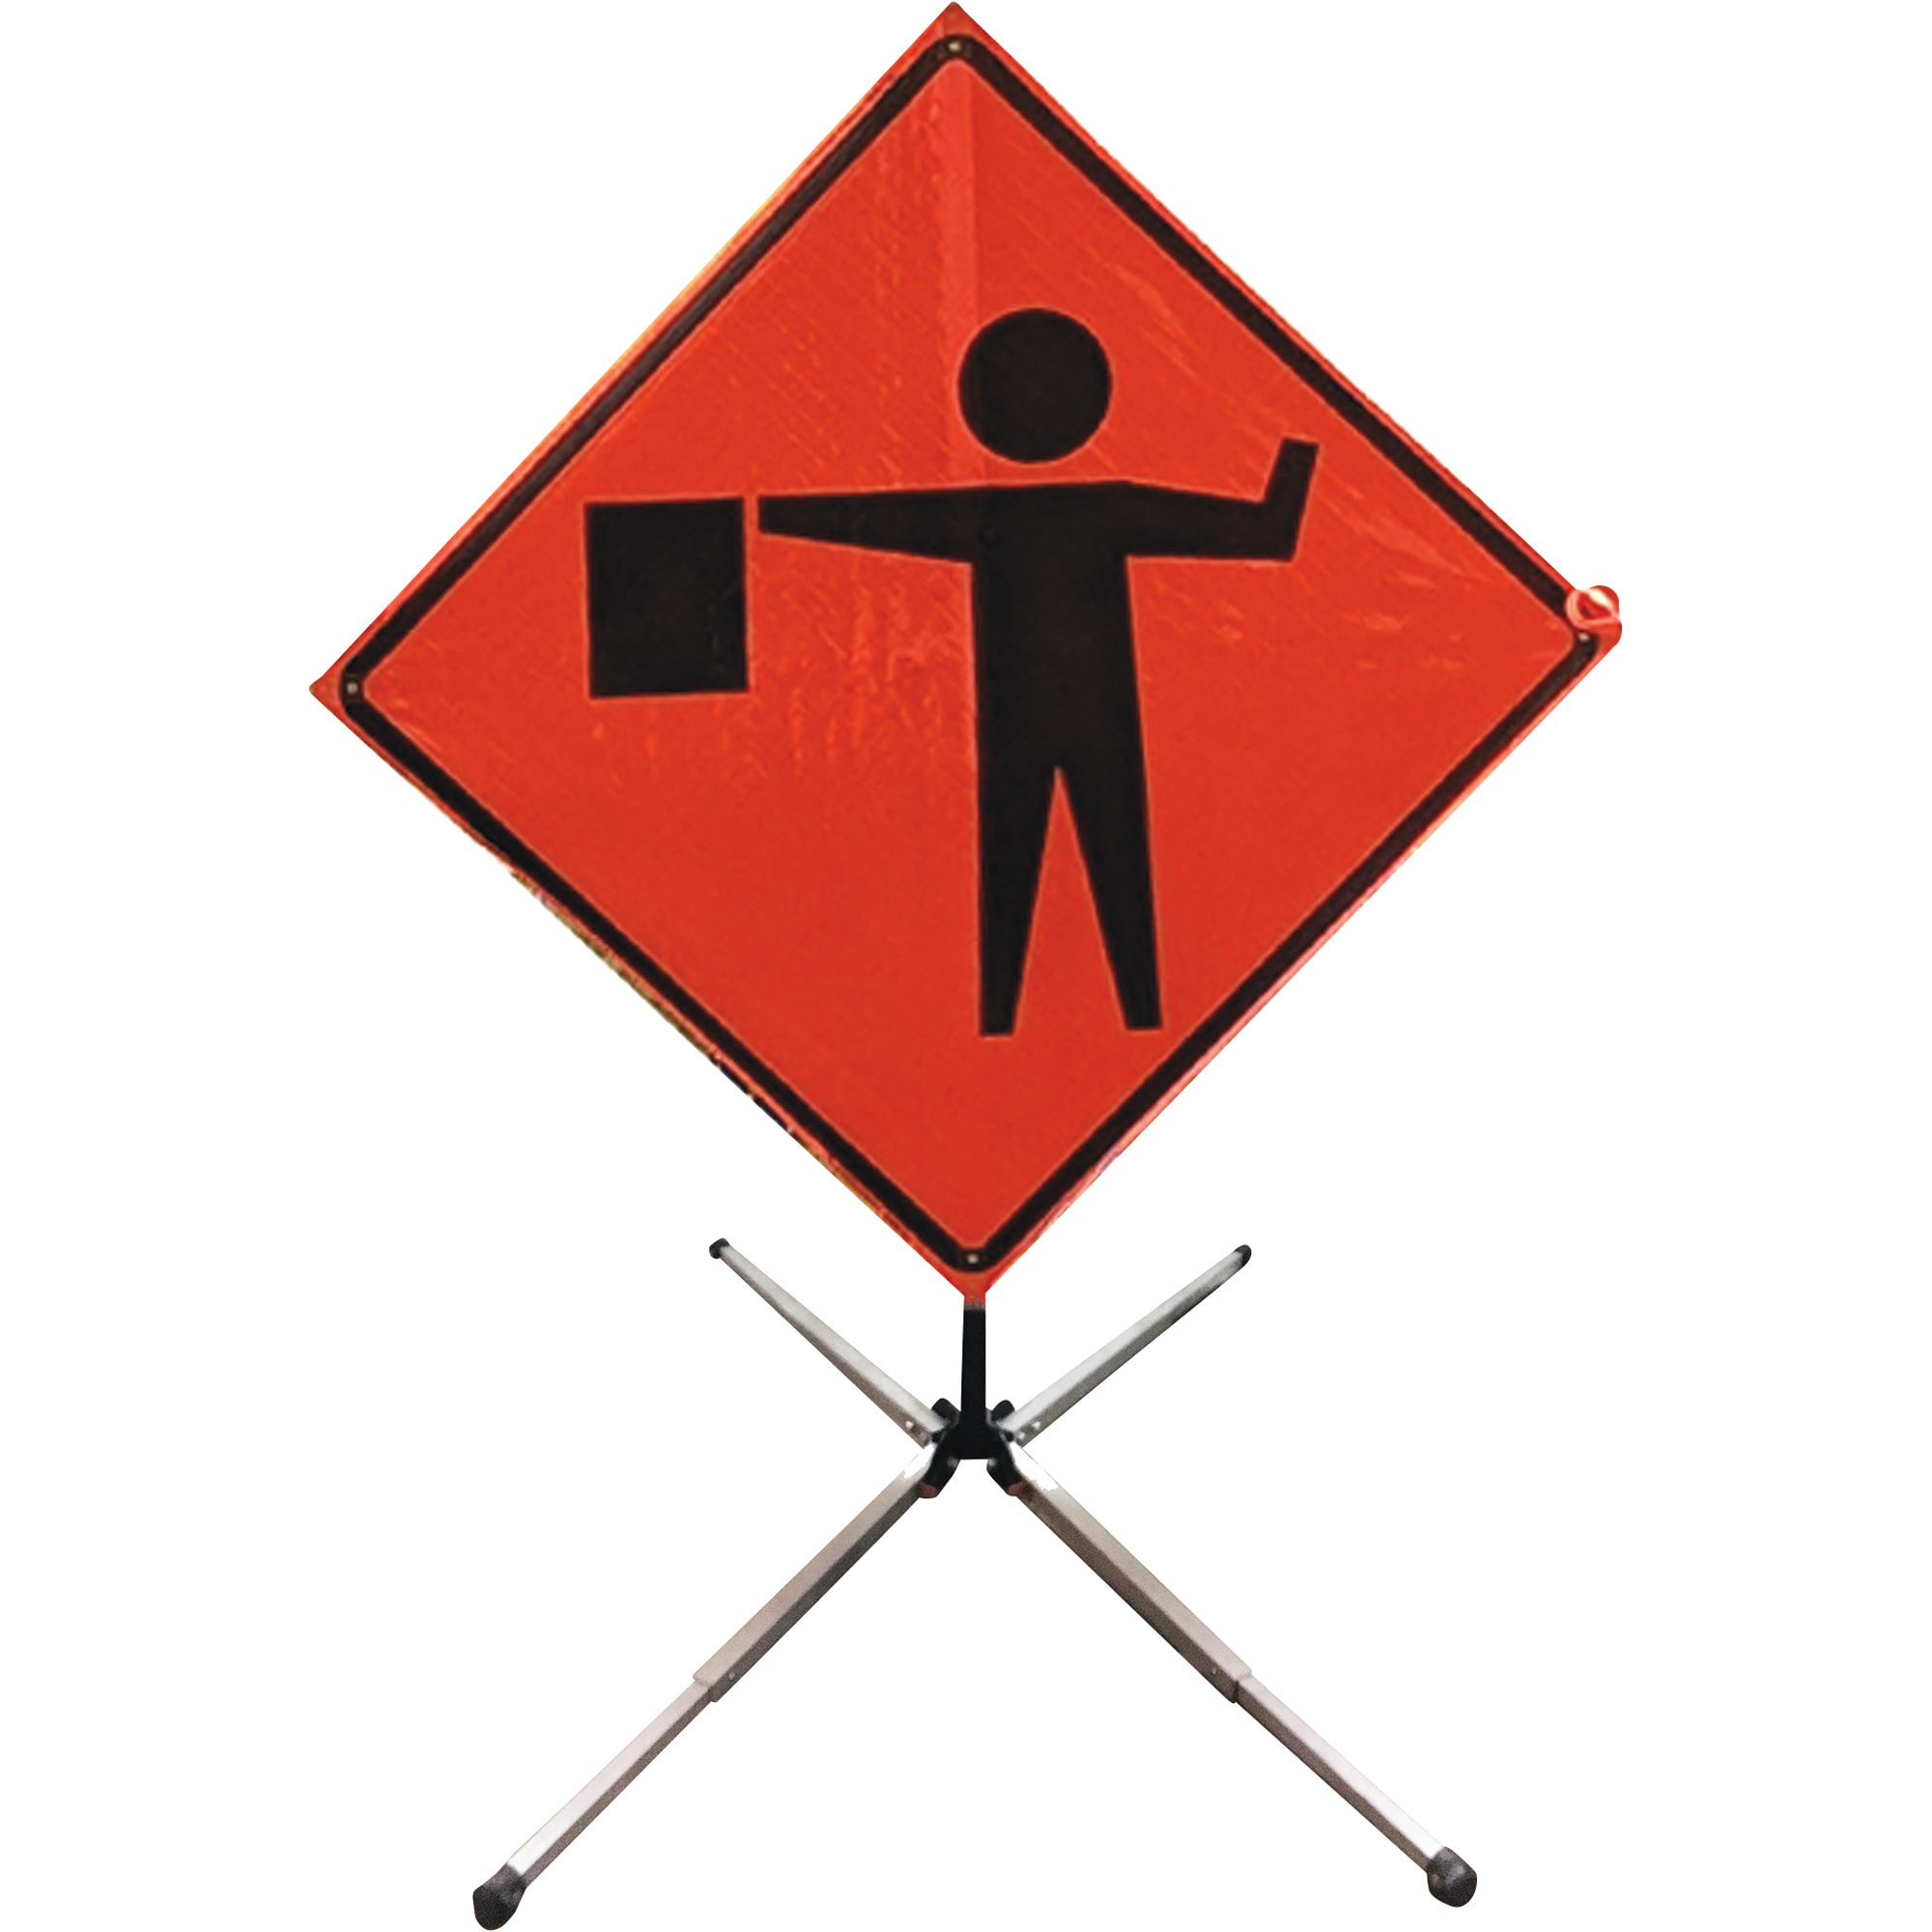 WATCHDOG Springless Sign Stand for Roll-Up Traffic Safety Sign â Aluminum, For 36Inch x 36Inch or 48Inch x 48Inch Sign â Model SS300A